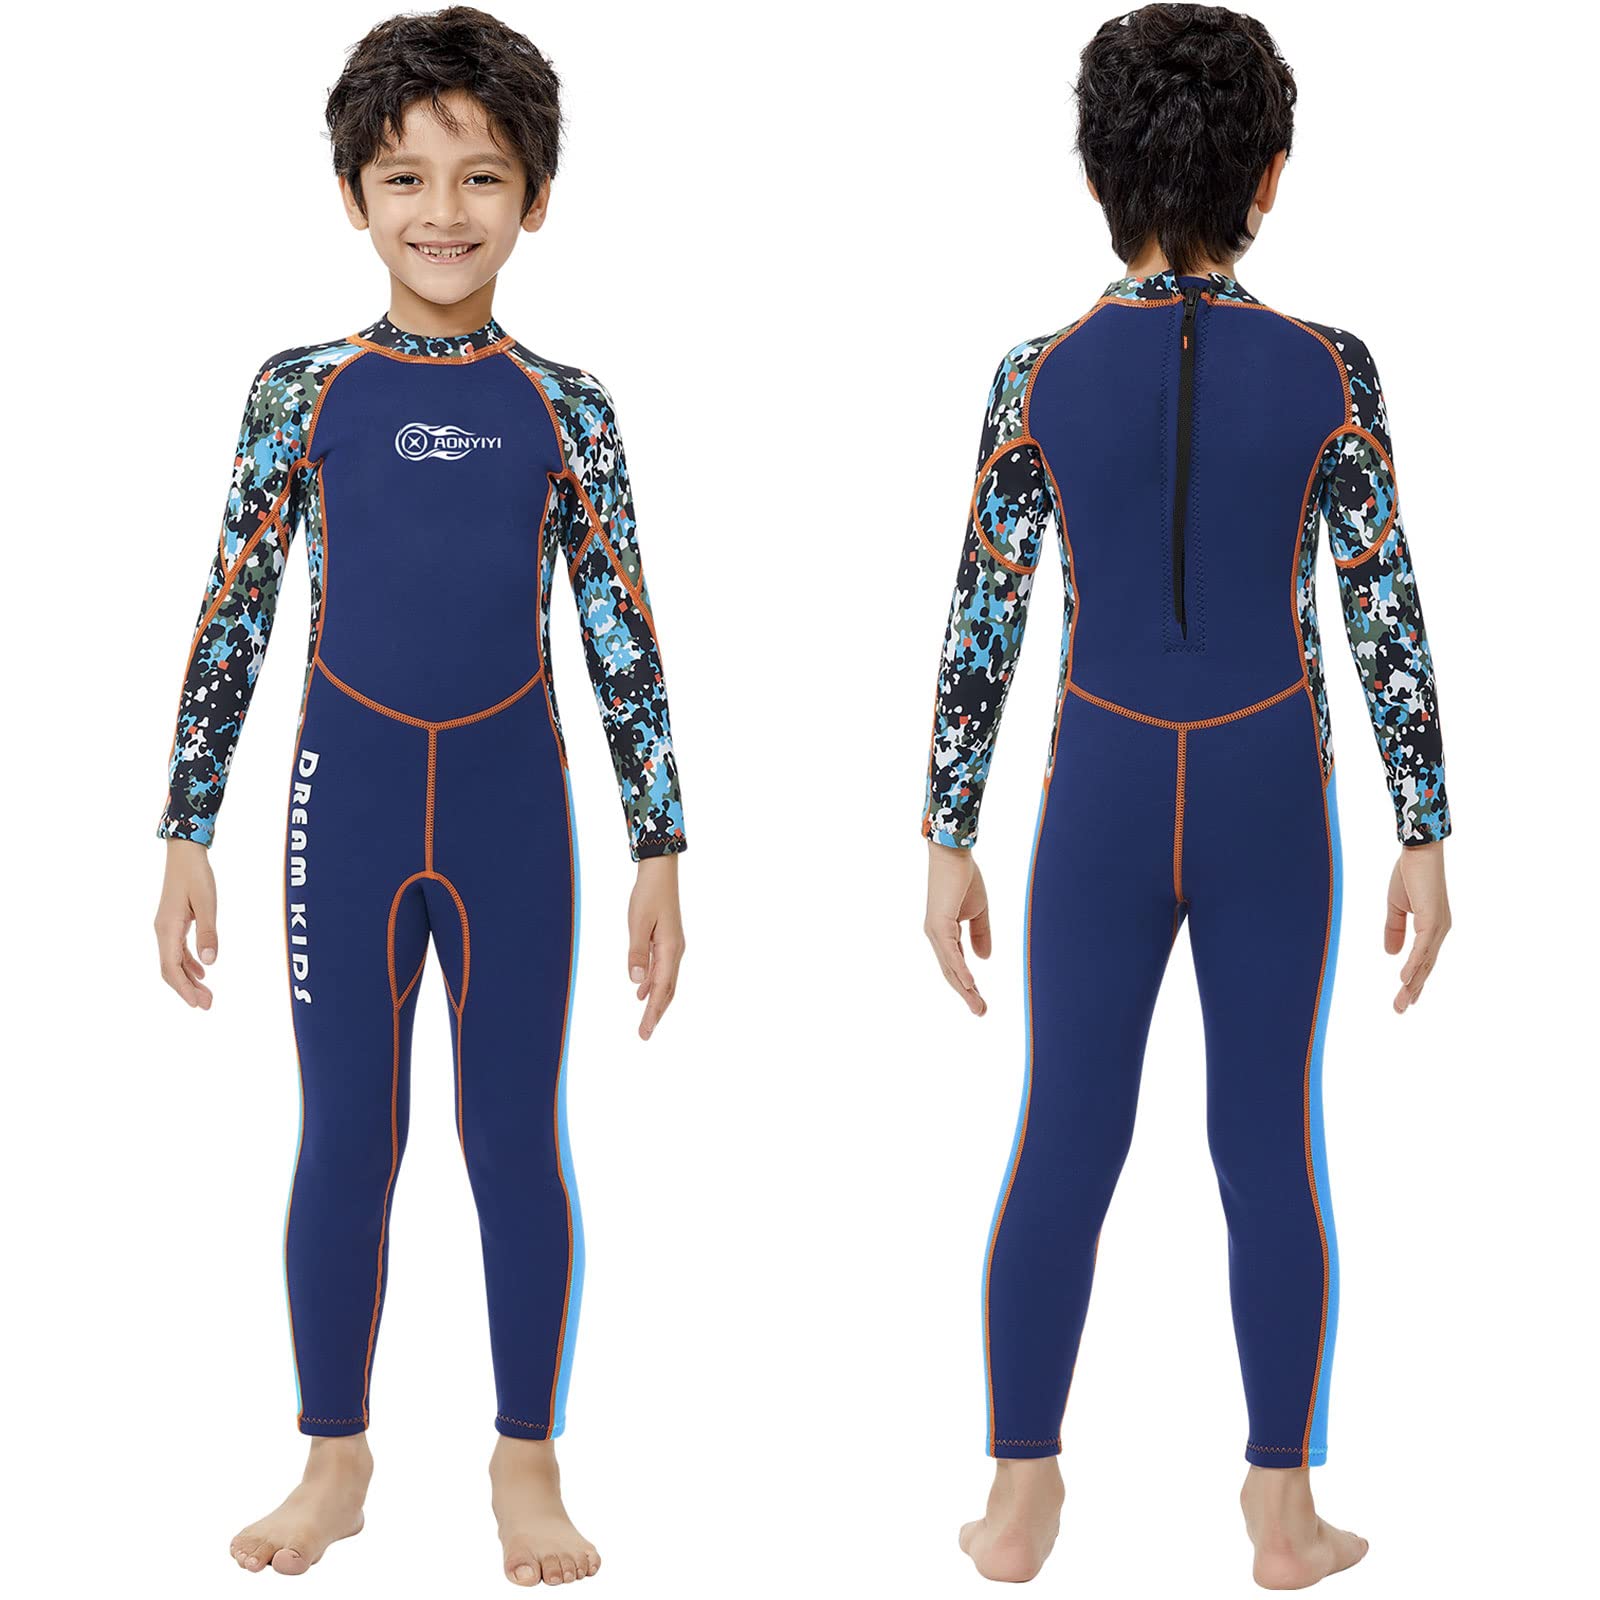 Wetsuit Kids Full Suits 2.5mm Neoprene Wet Suit UV Protection Keep